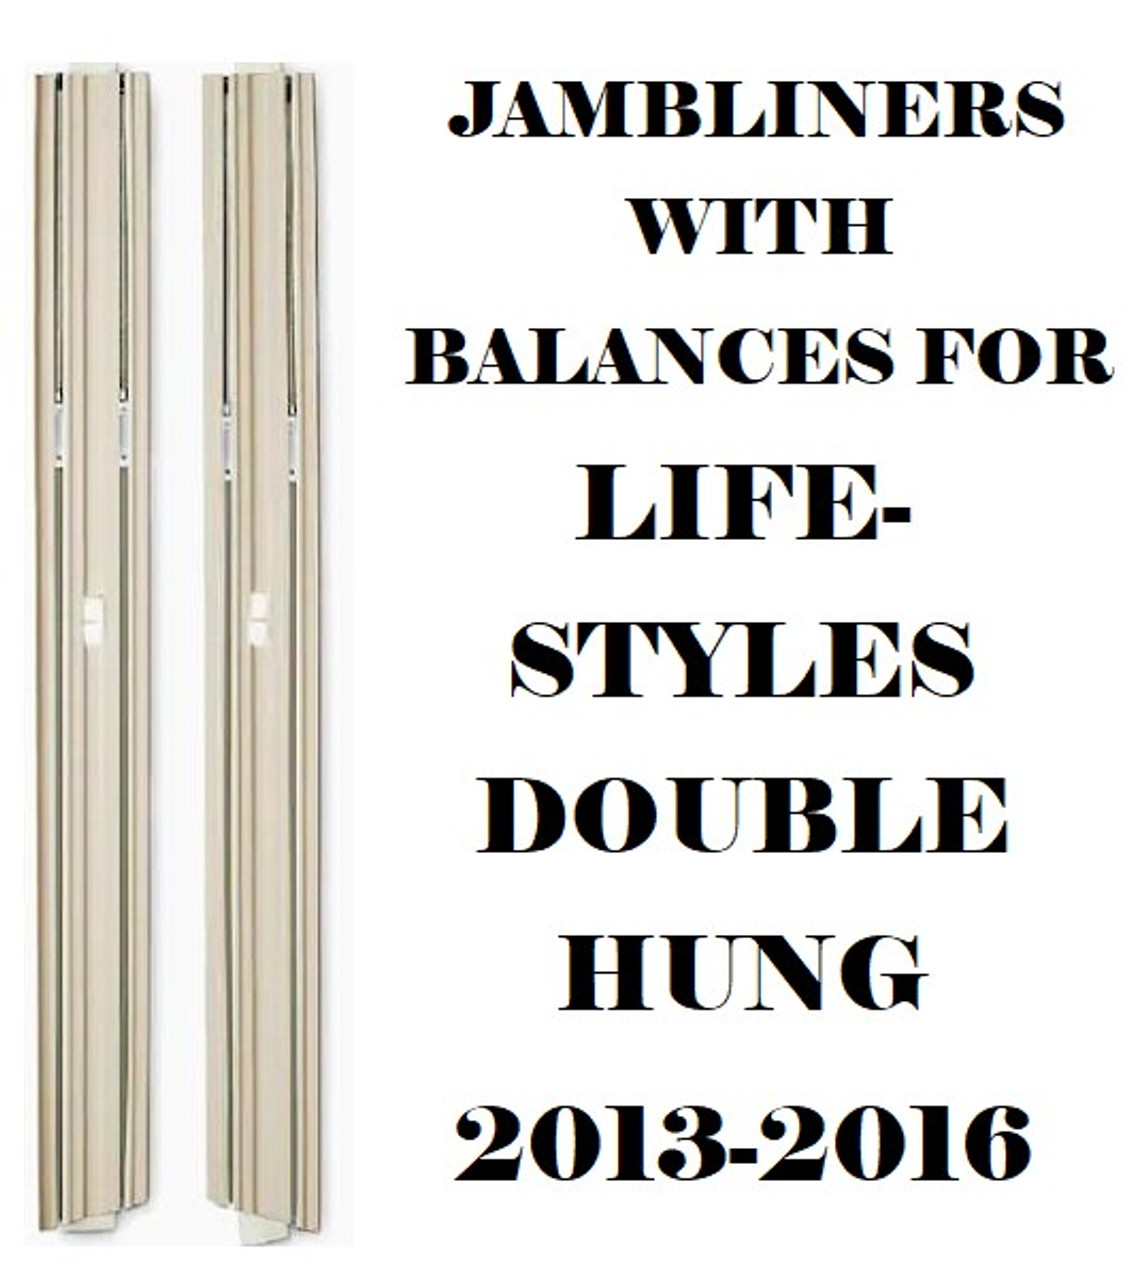 Set of Lincoln  jamb liners & balances for Lifestyles series: 2013-2016